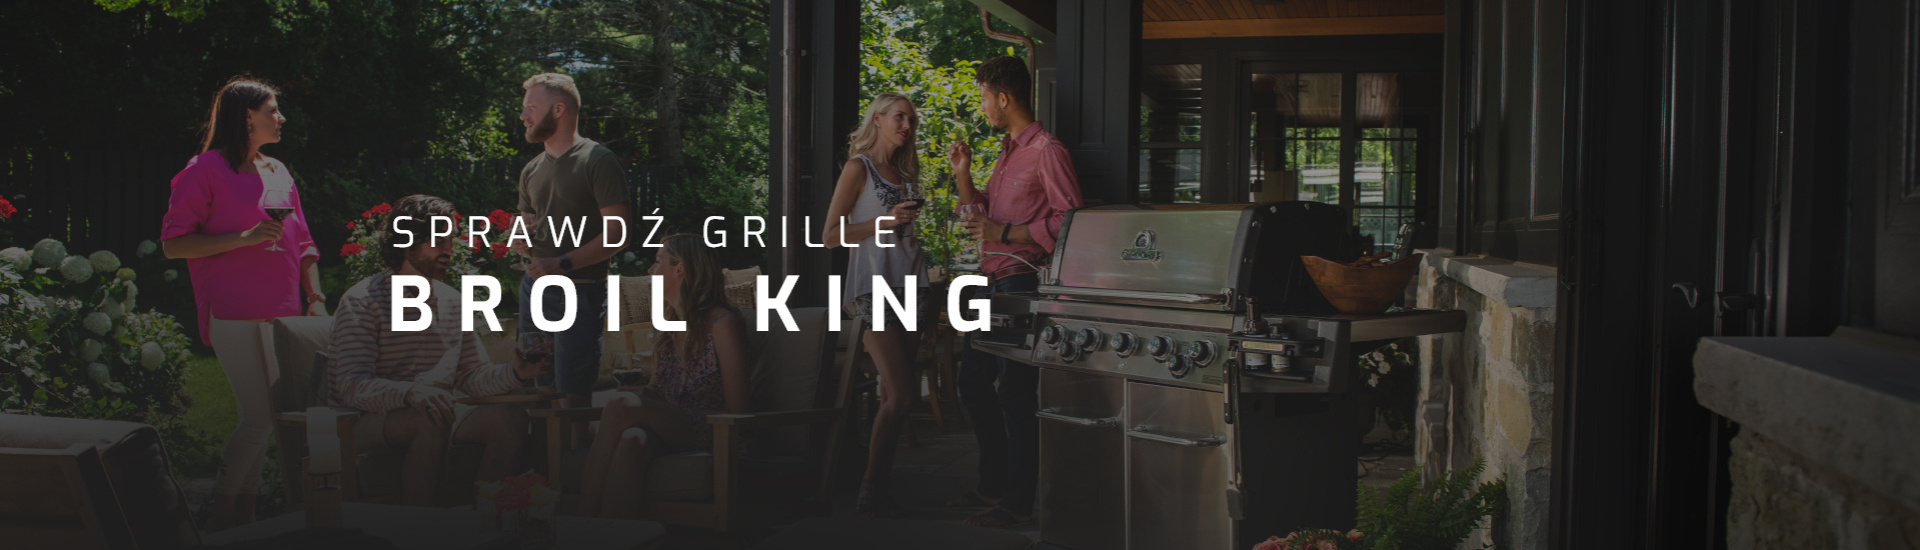 Grille Broil King